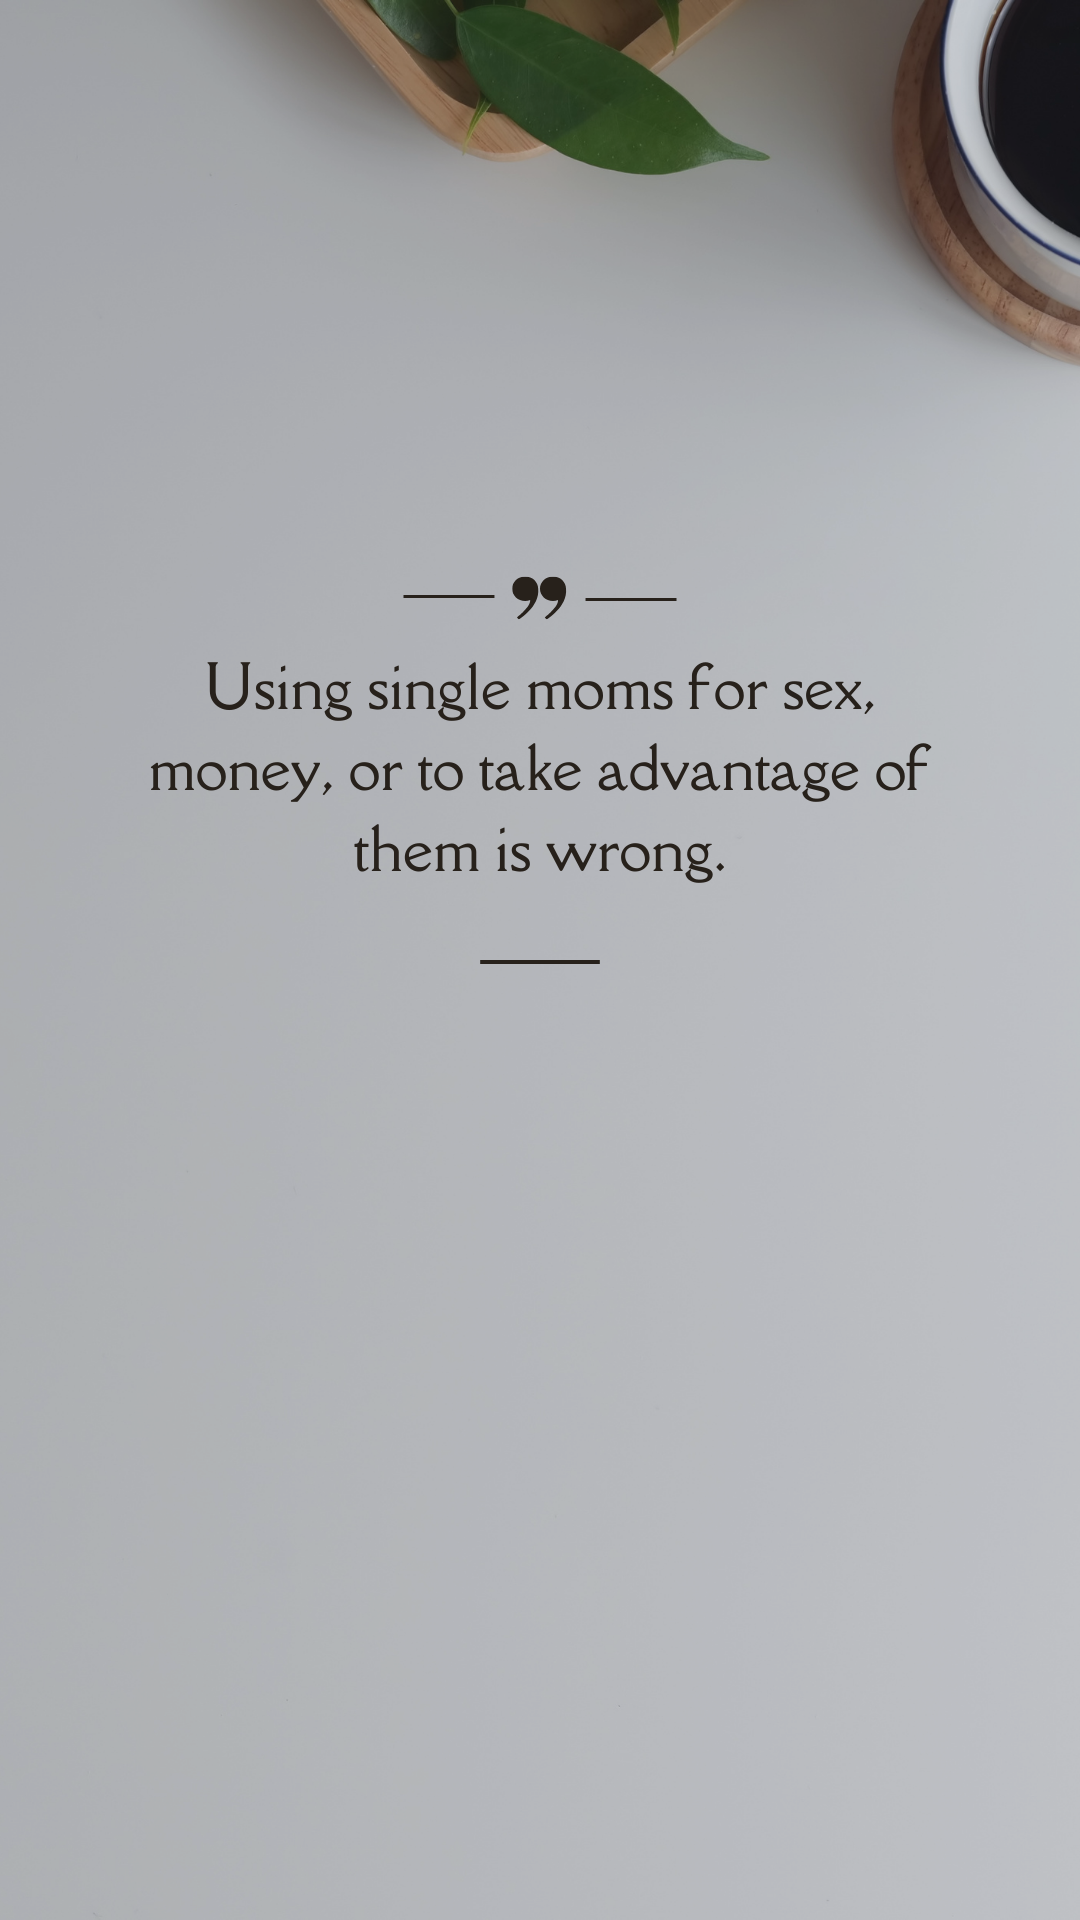 Using single moms for sex, money, or to take advantage of them is wrong. (Quote)